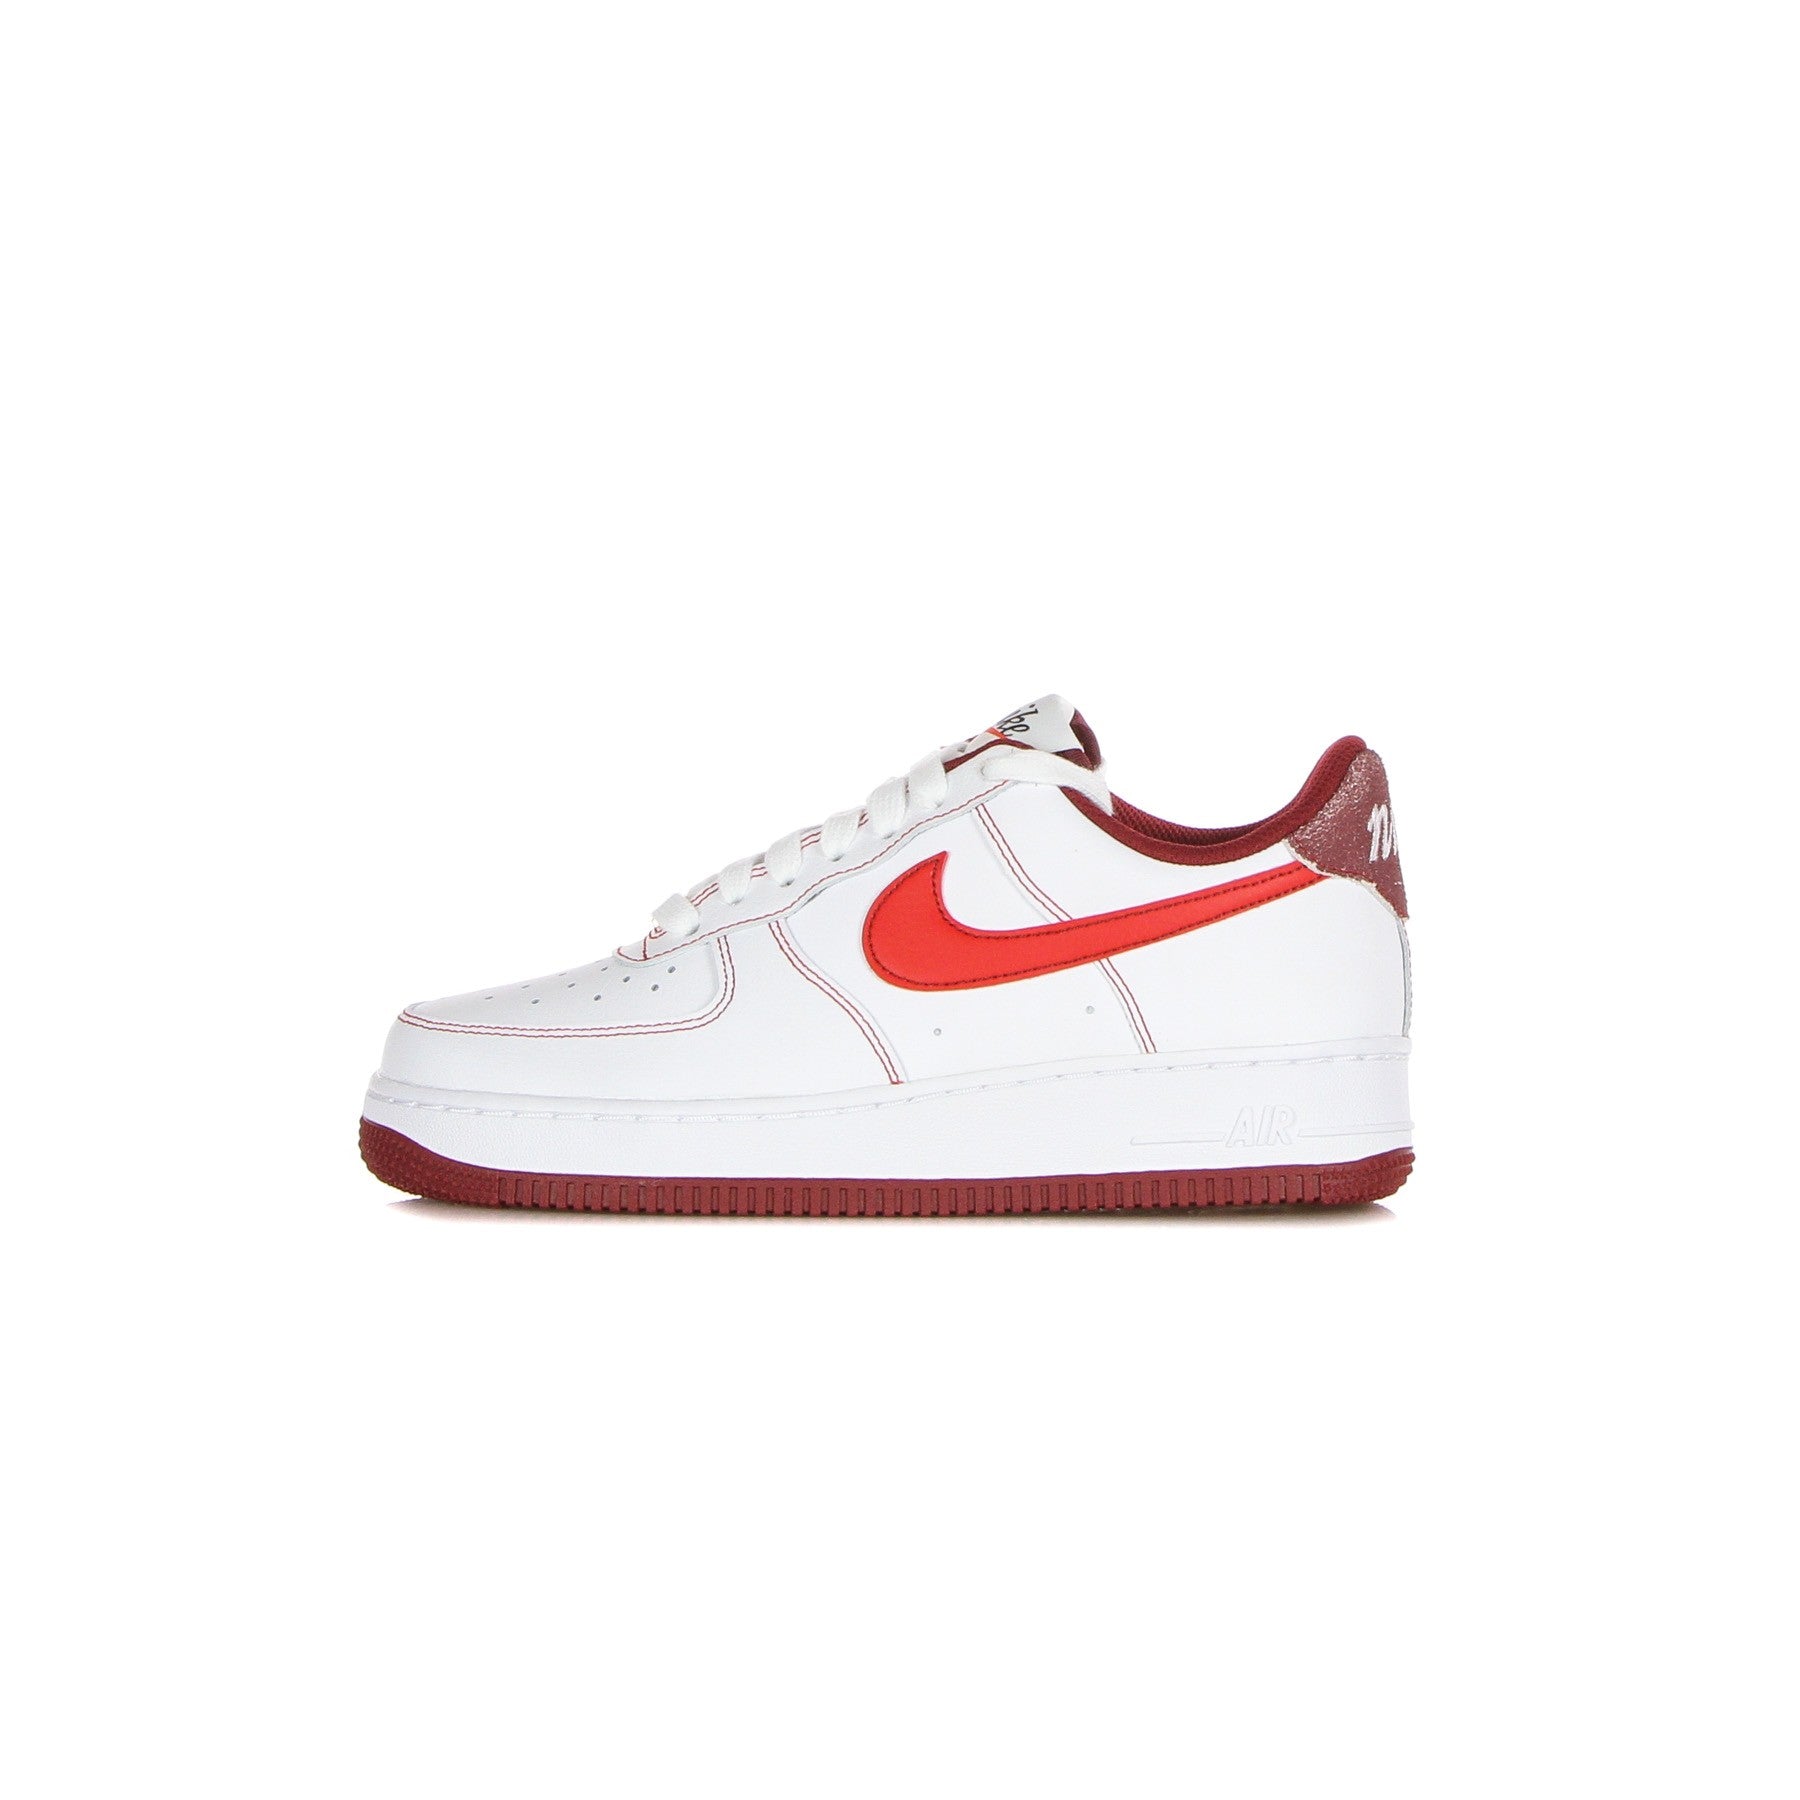 Air Force 1 '07 Men's Low Shoe White/university Red/team Red/sail